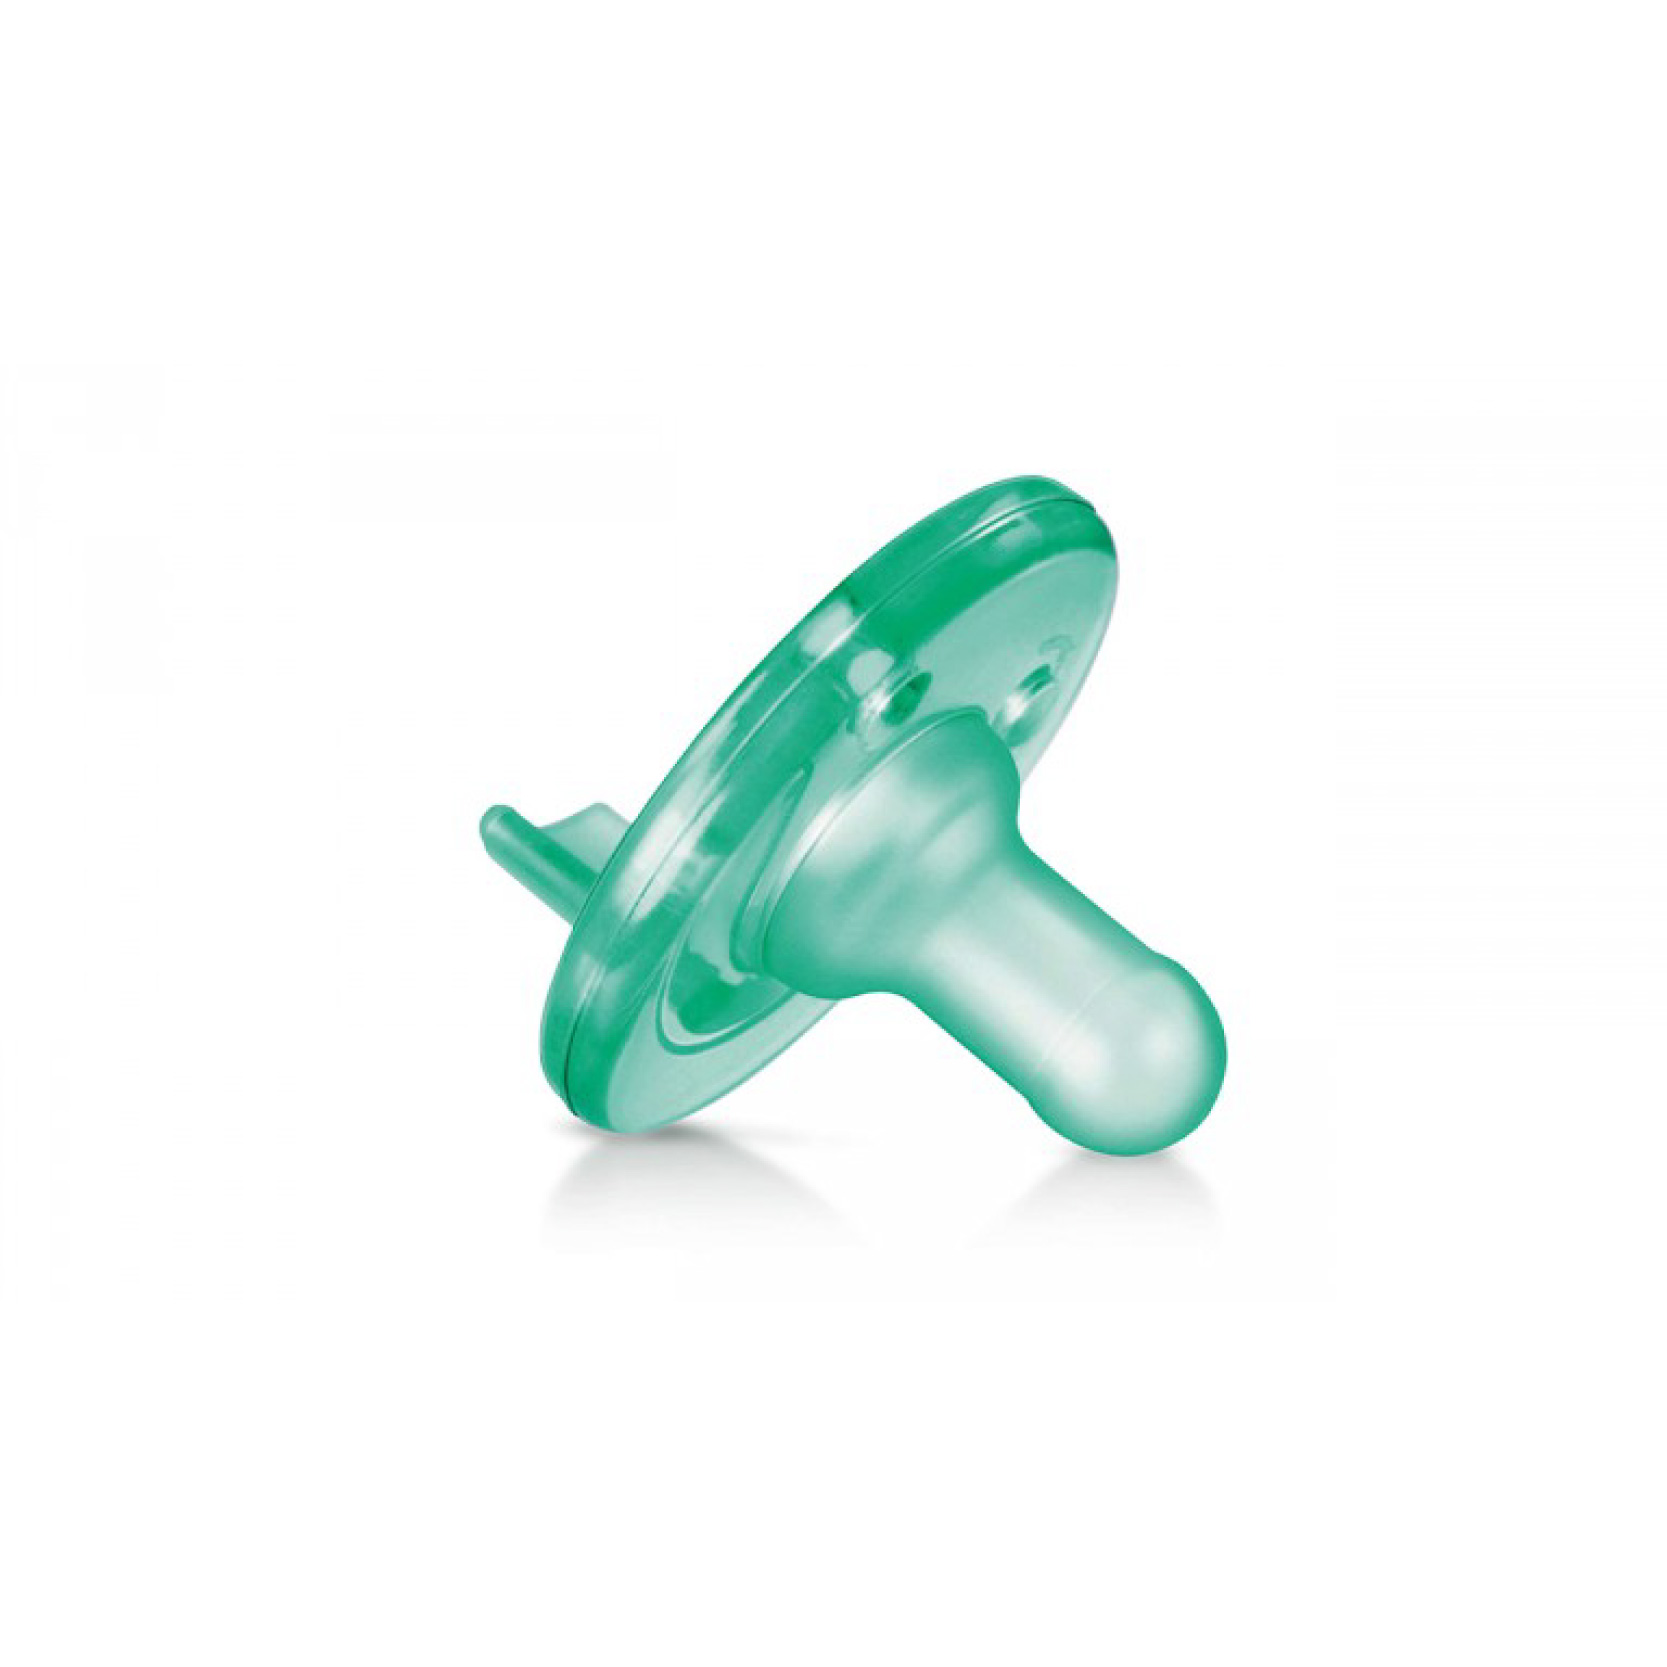 Motherhood Choice Awards 2022 Winner - Philips Avent Soothie Pacifier